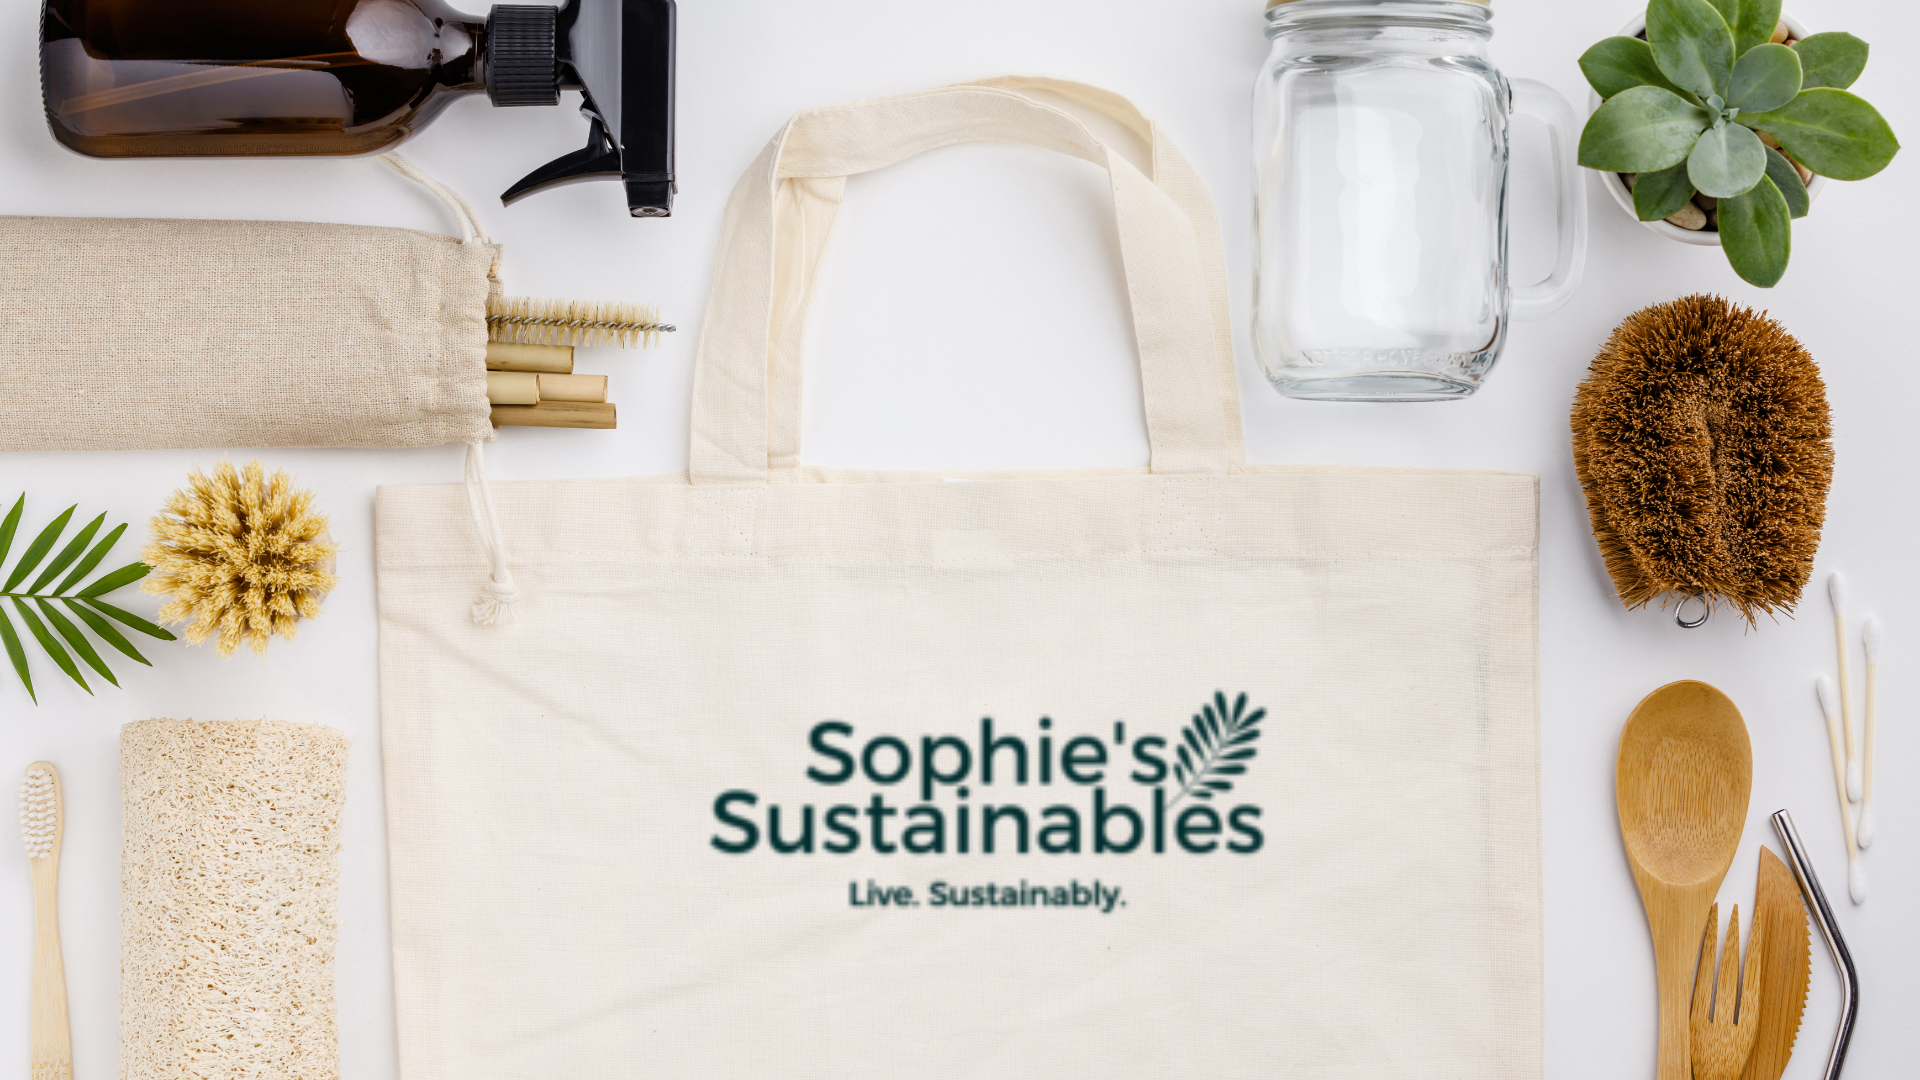 Sophie's Sustainables